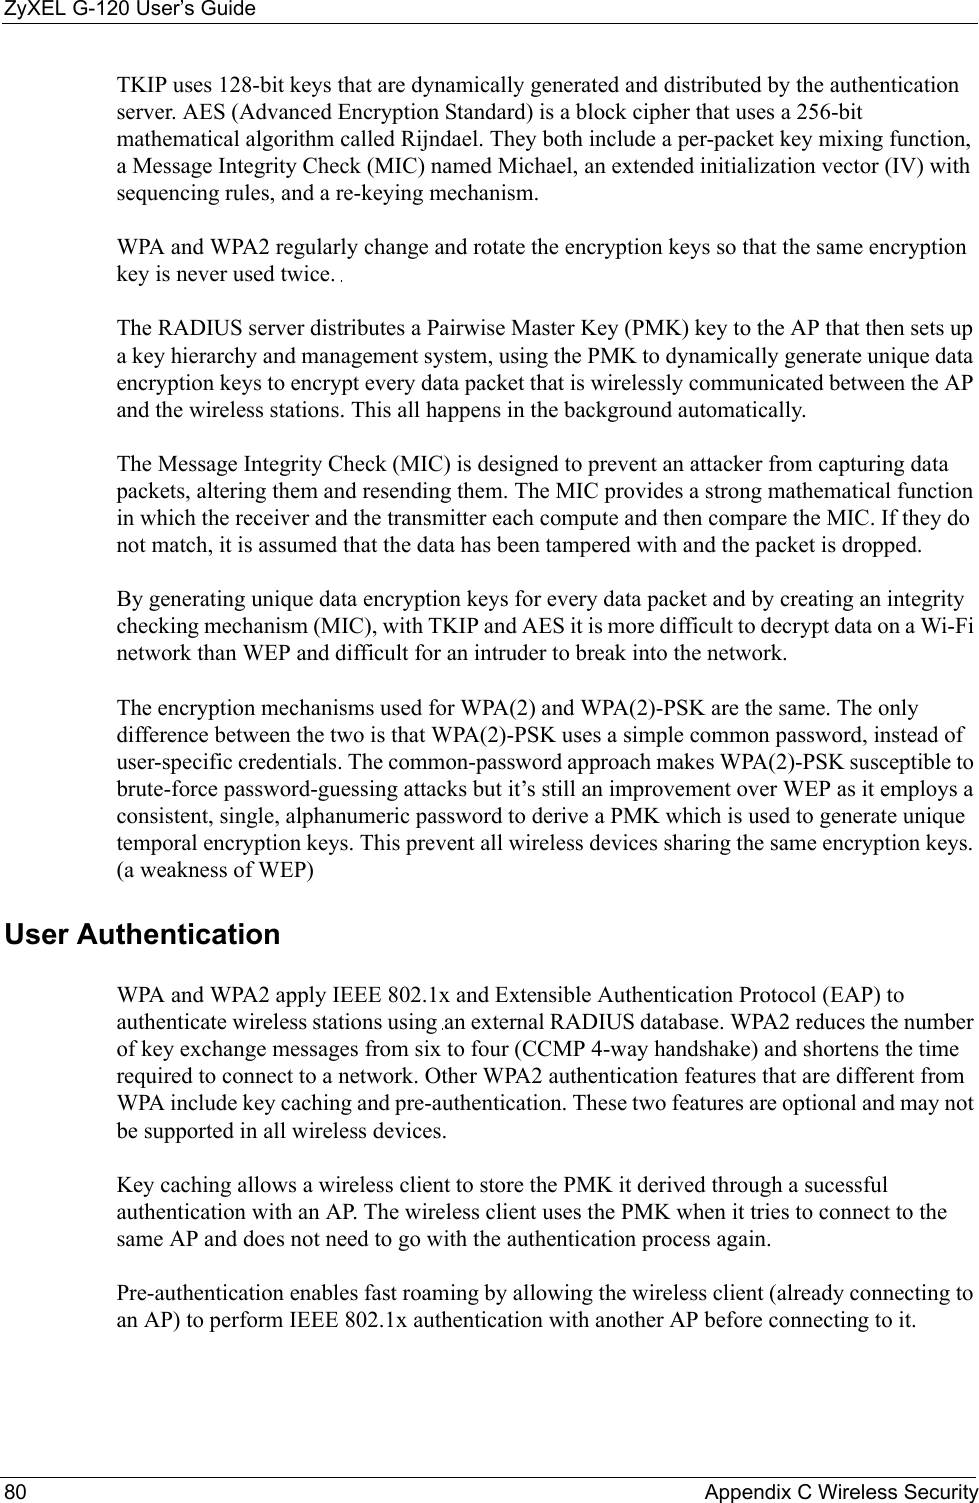 ZyXEL G-120 User’s Guide80 Appendix C Wireless SecurityTKIP uses 128-bit keys that are dynamically generated and distributed by the authentication server. AES (Advanced Encryption Standard) is a block cipher that uses a 256-bit mathematical algorithm called Rijndael. They both include a per-packet key mixing function, a Message Integrity Check (MIC) named Michael, an extended initialization vector (IV) with sequencing rules, and a re-keying mechanism.WPA and WPA2 regularly change and rotate the encryption keys so that the same encryption key is never used twice. The RADIUS server distributes a Pairwise Master Key (PMK) key to the AP that then sets up a key hierarchy and management system, using the PMK to dynamically generate unique data encryption keys to encrypt every data packet that is wirelessly communicated between the AP and the wireless stations. This all happens in the background automatically.The Message Integrity Check (MIC) is designed to prevent an attacker from capturing data packets, altering them and resending them. The MIC provides a strong mathematical function in which the receiver and the transmitter each compute and then compare the MIC. If they do not match, it is assumed that the data has been tampered with and the packet is dropped. By generating unique data encryption keys for every data packet and by creating an integrity checking mechanism (MIC), with TKIP and AES it is more difficult to decrypt data on a Wi-Fi network than WEP and difficult for an intruder to break into the network. The encryption mechanisms used for WPA(2) and WPA(2)-PSK are the same. The only difference between the two is that WPA(2)-PSK uses a simple common password, instead of user-specific credentials. The common-password approach makes WPA(2)-PSK susceptible to brute-force password-guessing attacks but it’s still an improvement over WEP as it employs a consistent, single, alphanumeric password to derive a PMK which is used to generate unique temporal encryption keys. This prevent all wireless devices sharing the same encryption keys. (a weakness of WEP)User Authentication WPA and WPA2 apply IEEE 802.1x and Extensible Authentication Protocol (EAP) to authenticate wireless stations using an external RADIUS database. WPA2 reduces the number of key exchange messages from six to four (CCMP 4-way handshake) and shortens the time required to connect to a network. Other WPA2 authentication features that are different from WPA include key caching and pre-authentication. These two features are optional and may not be supported in all wireless devices.Key caching allows a wireless client to store the PMK it derived through a sucessful authentication with an AP. The wireless client uses the PMK when it tries to connect to the same AP and does not need to go with the authentication process again.Pre-authentication enables fast roaming by allowing the wireless client (already connecting to an AP) to perform IEEE 802.1x authentication with another AP before connecting to it.